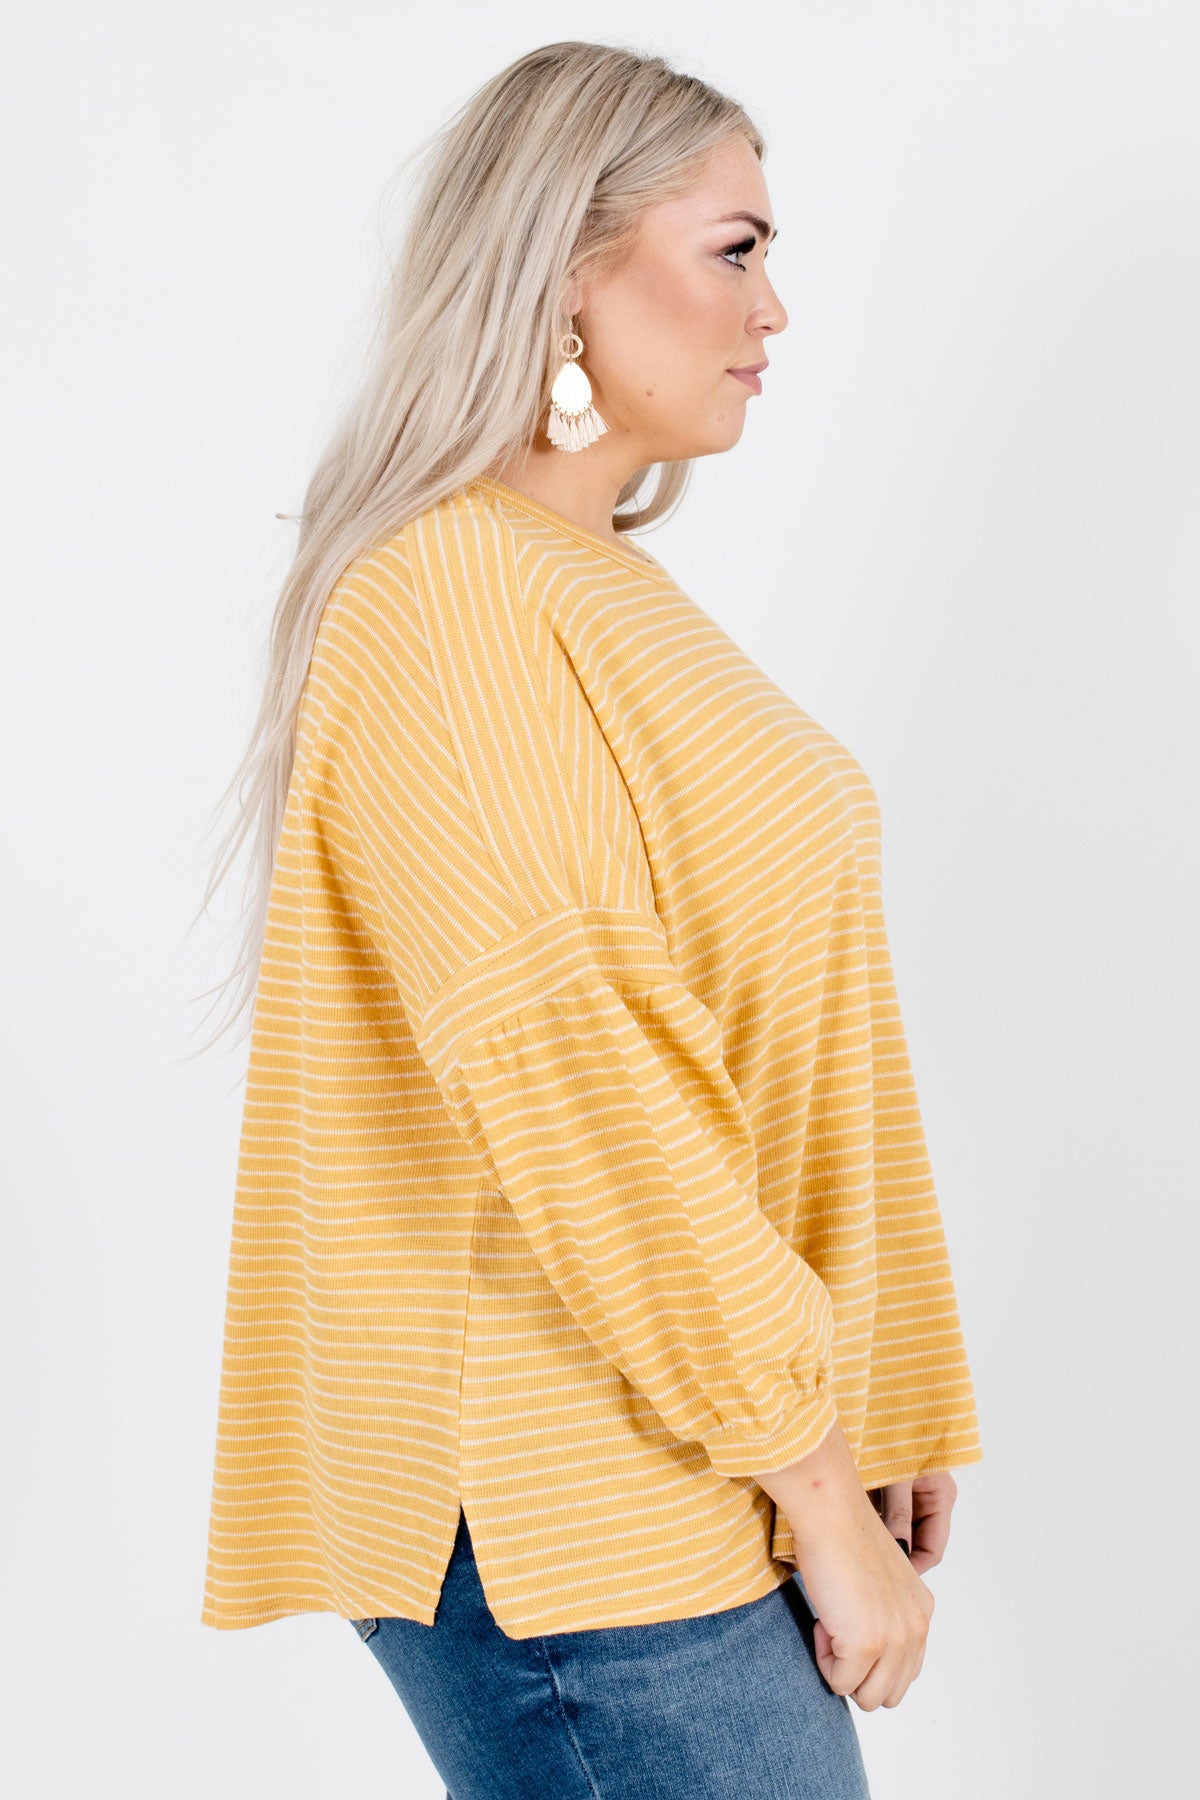 Casual Conversation Yellow Striped Top